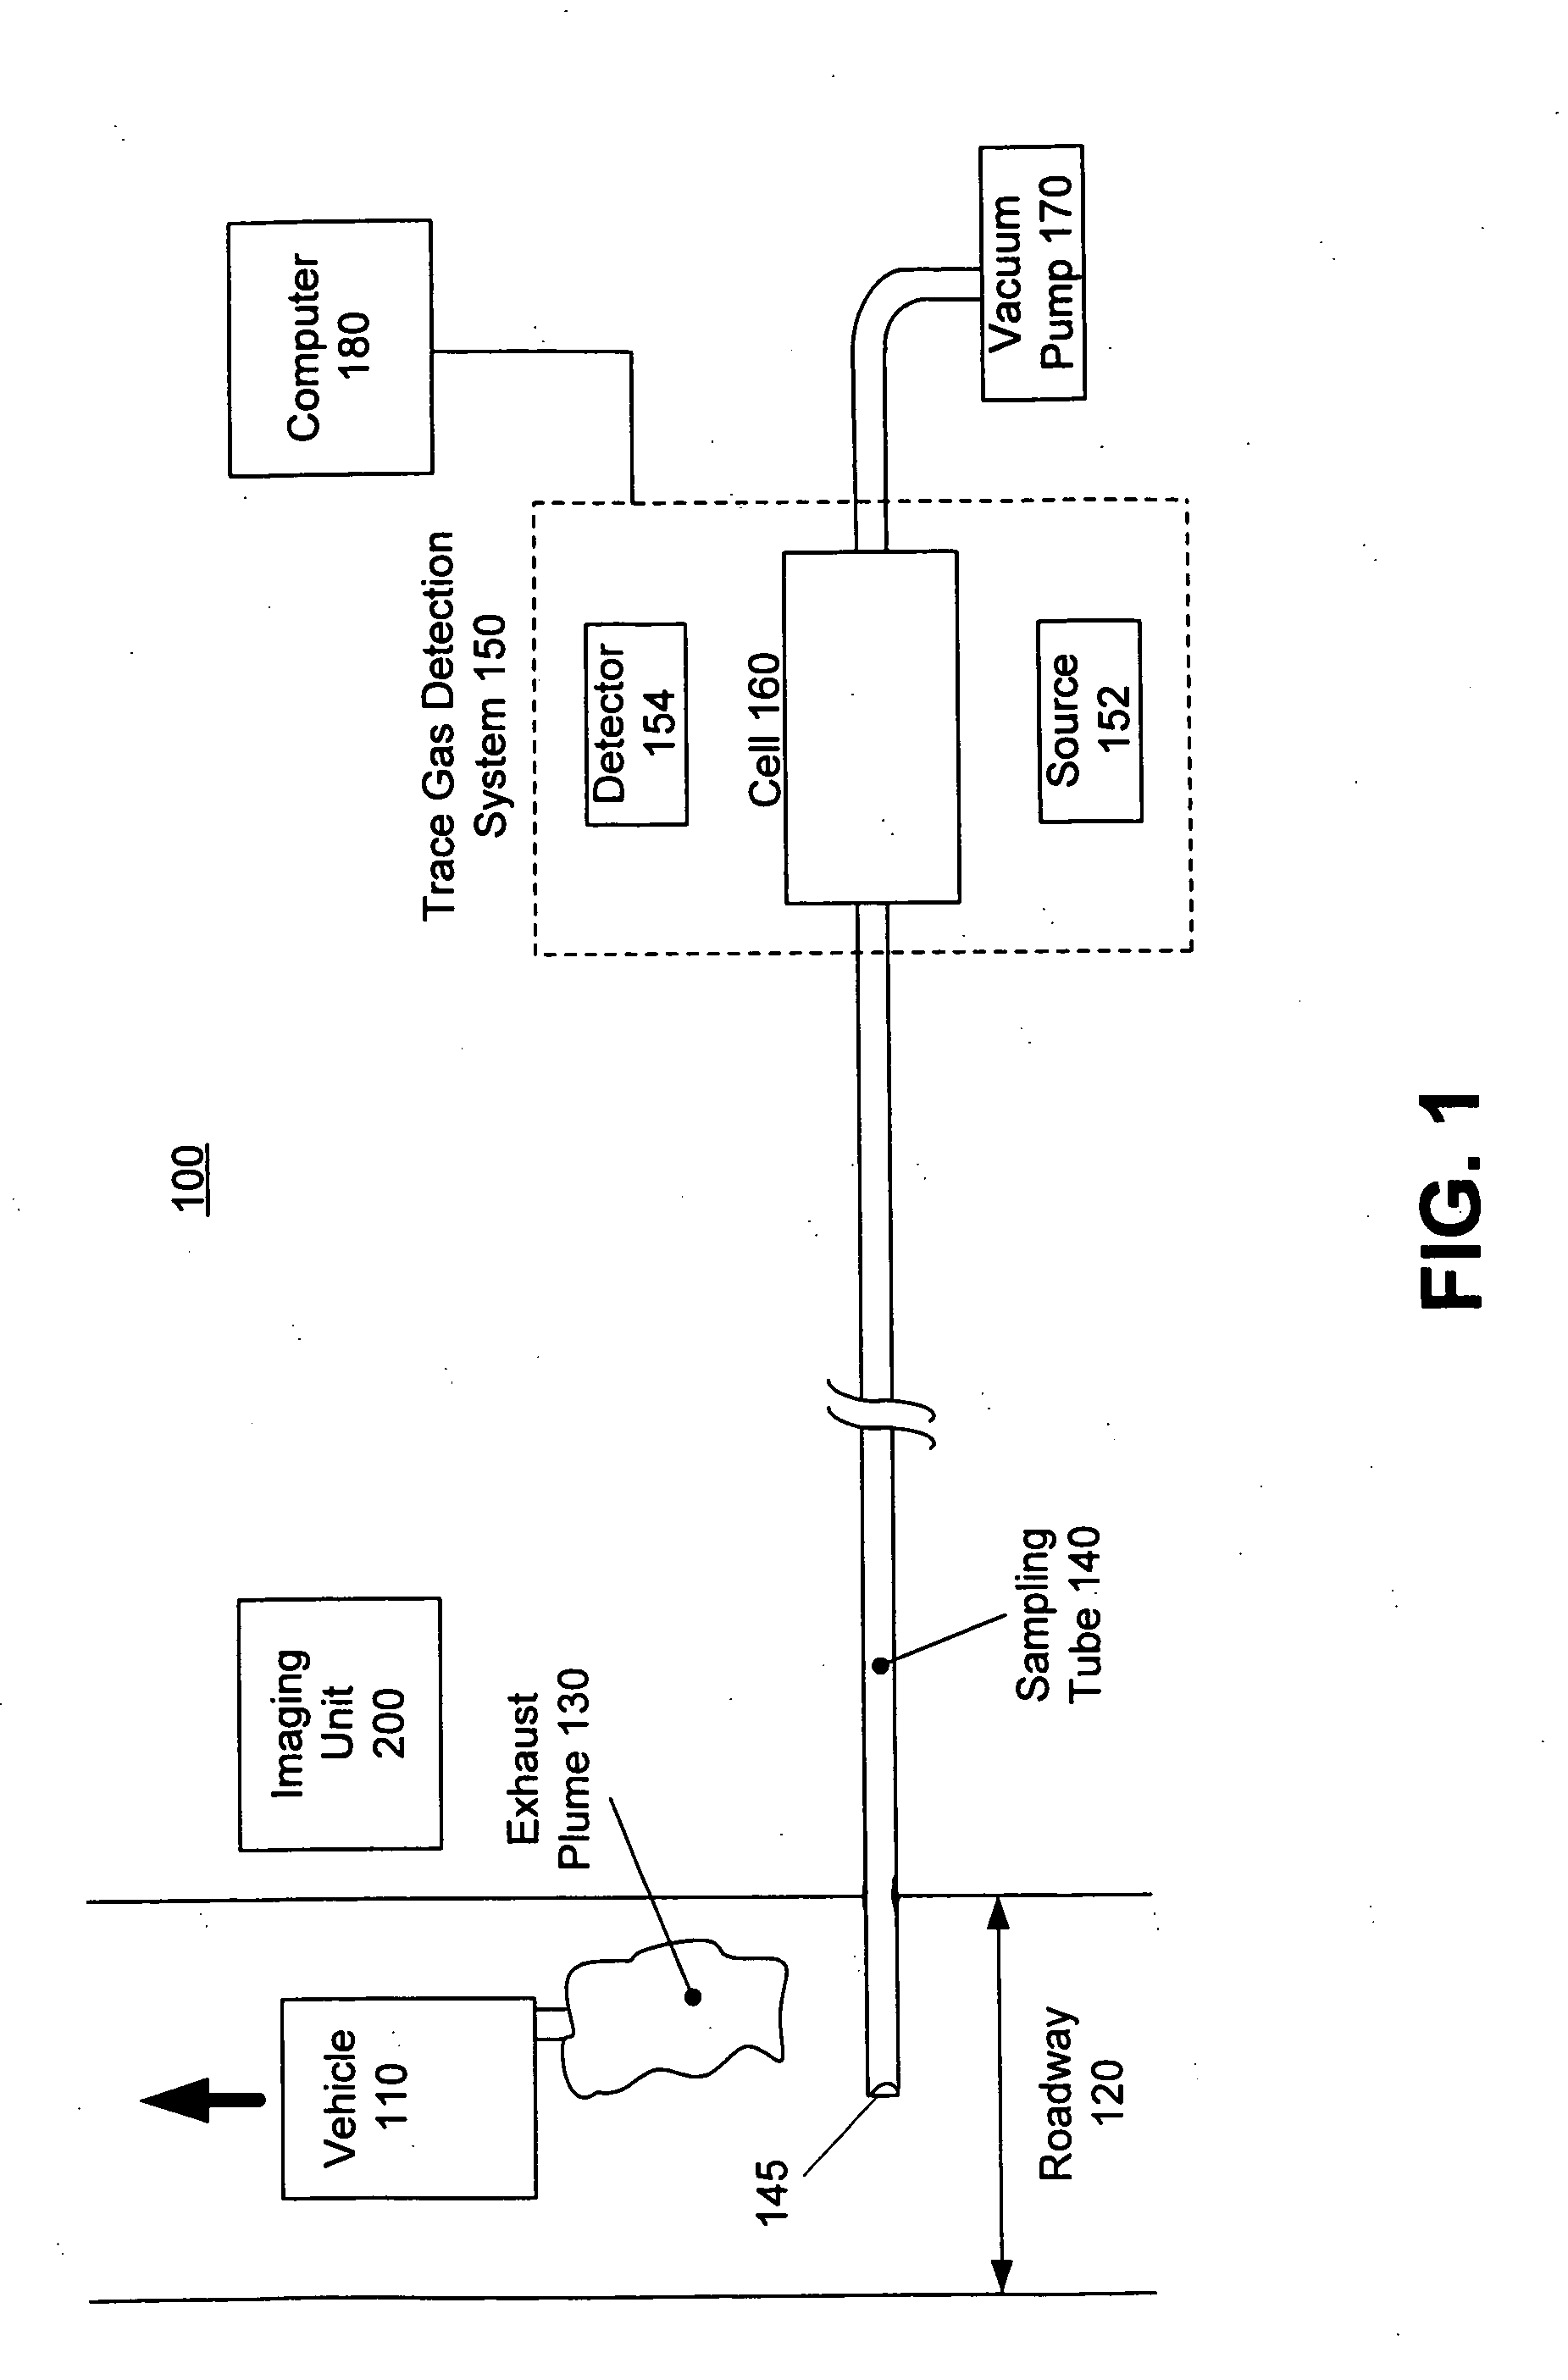 Extractive sampling system and method for measuring one or more molecular species